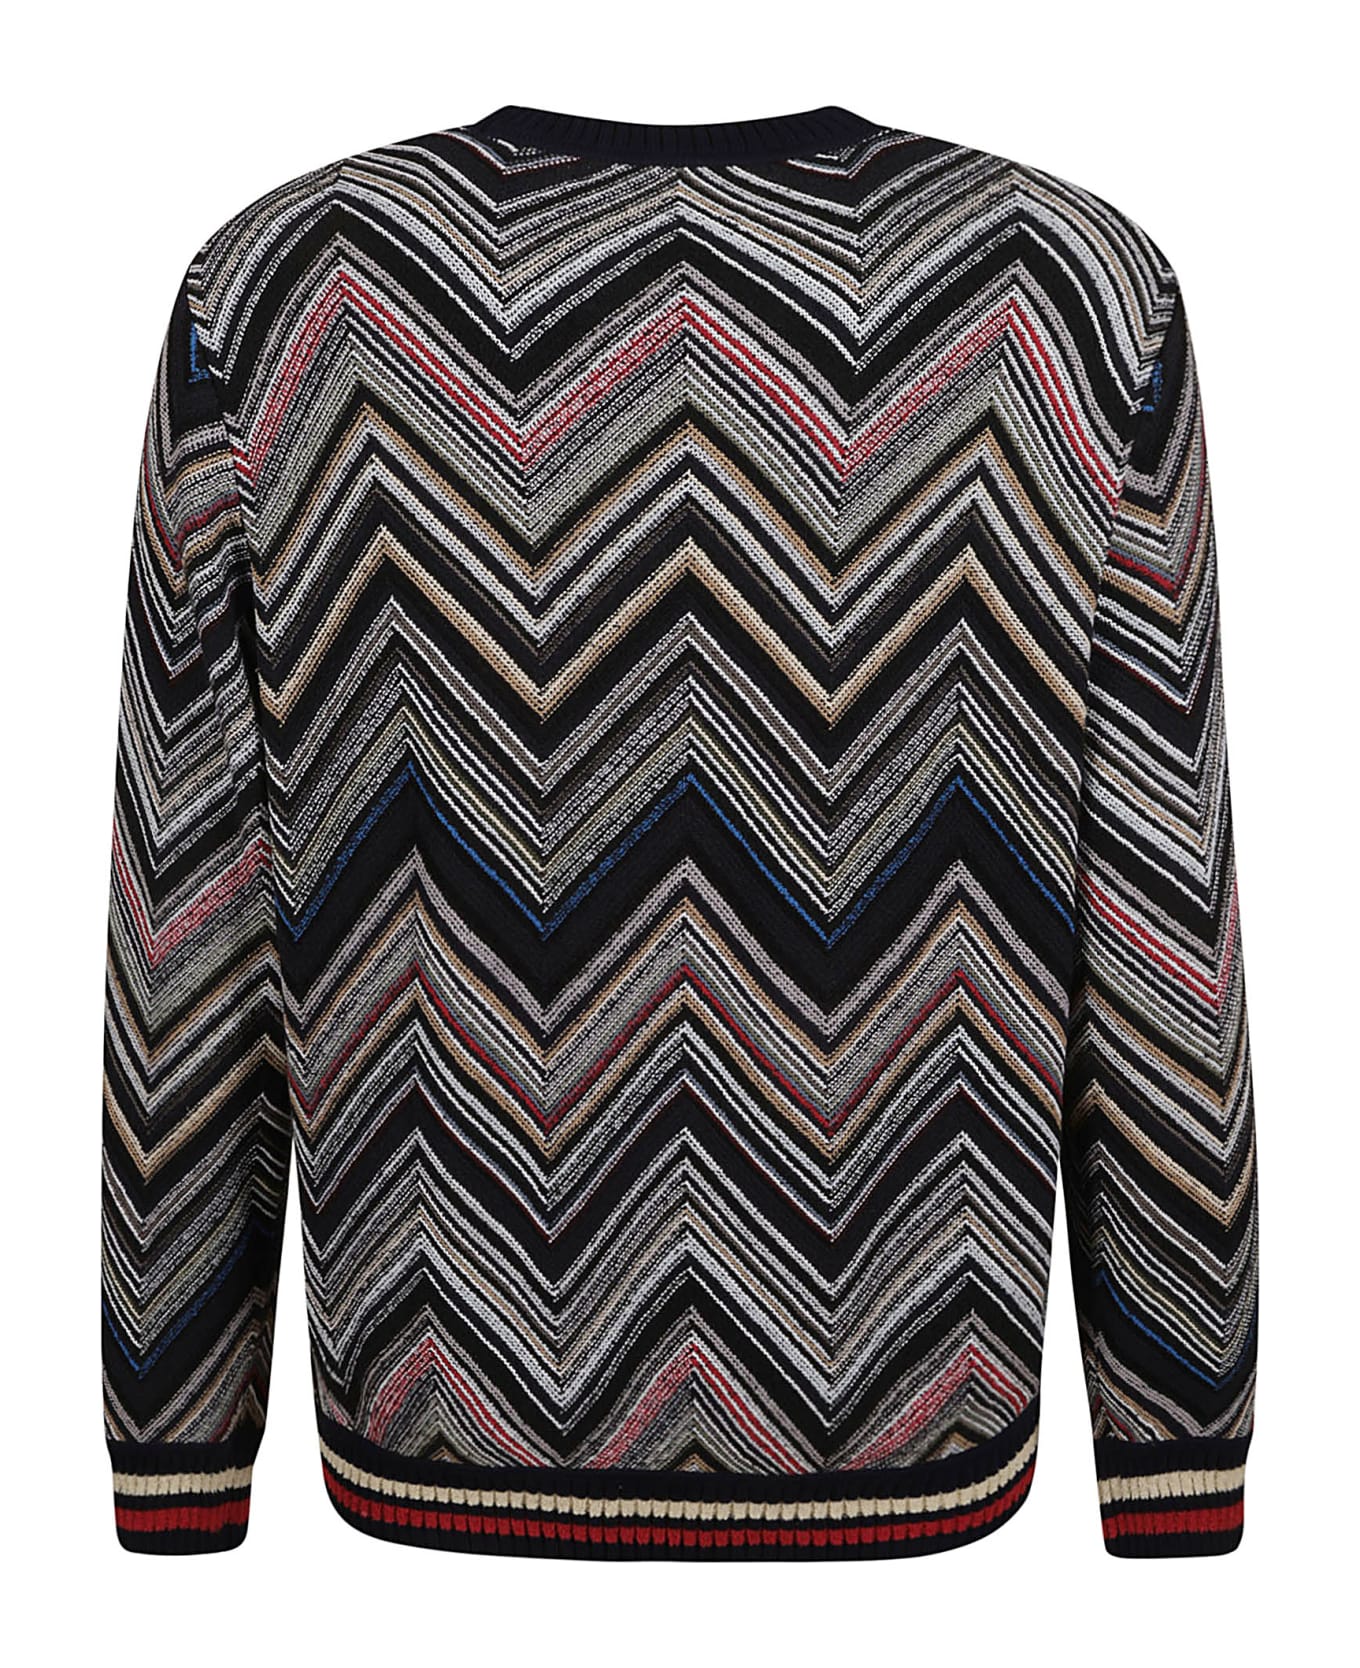 Missoni Knitted Sweater - Blue